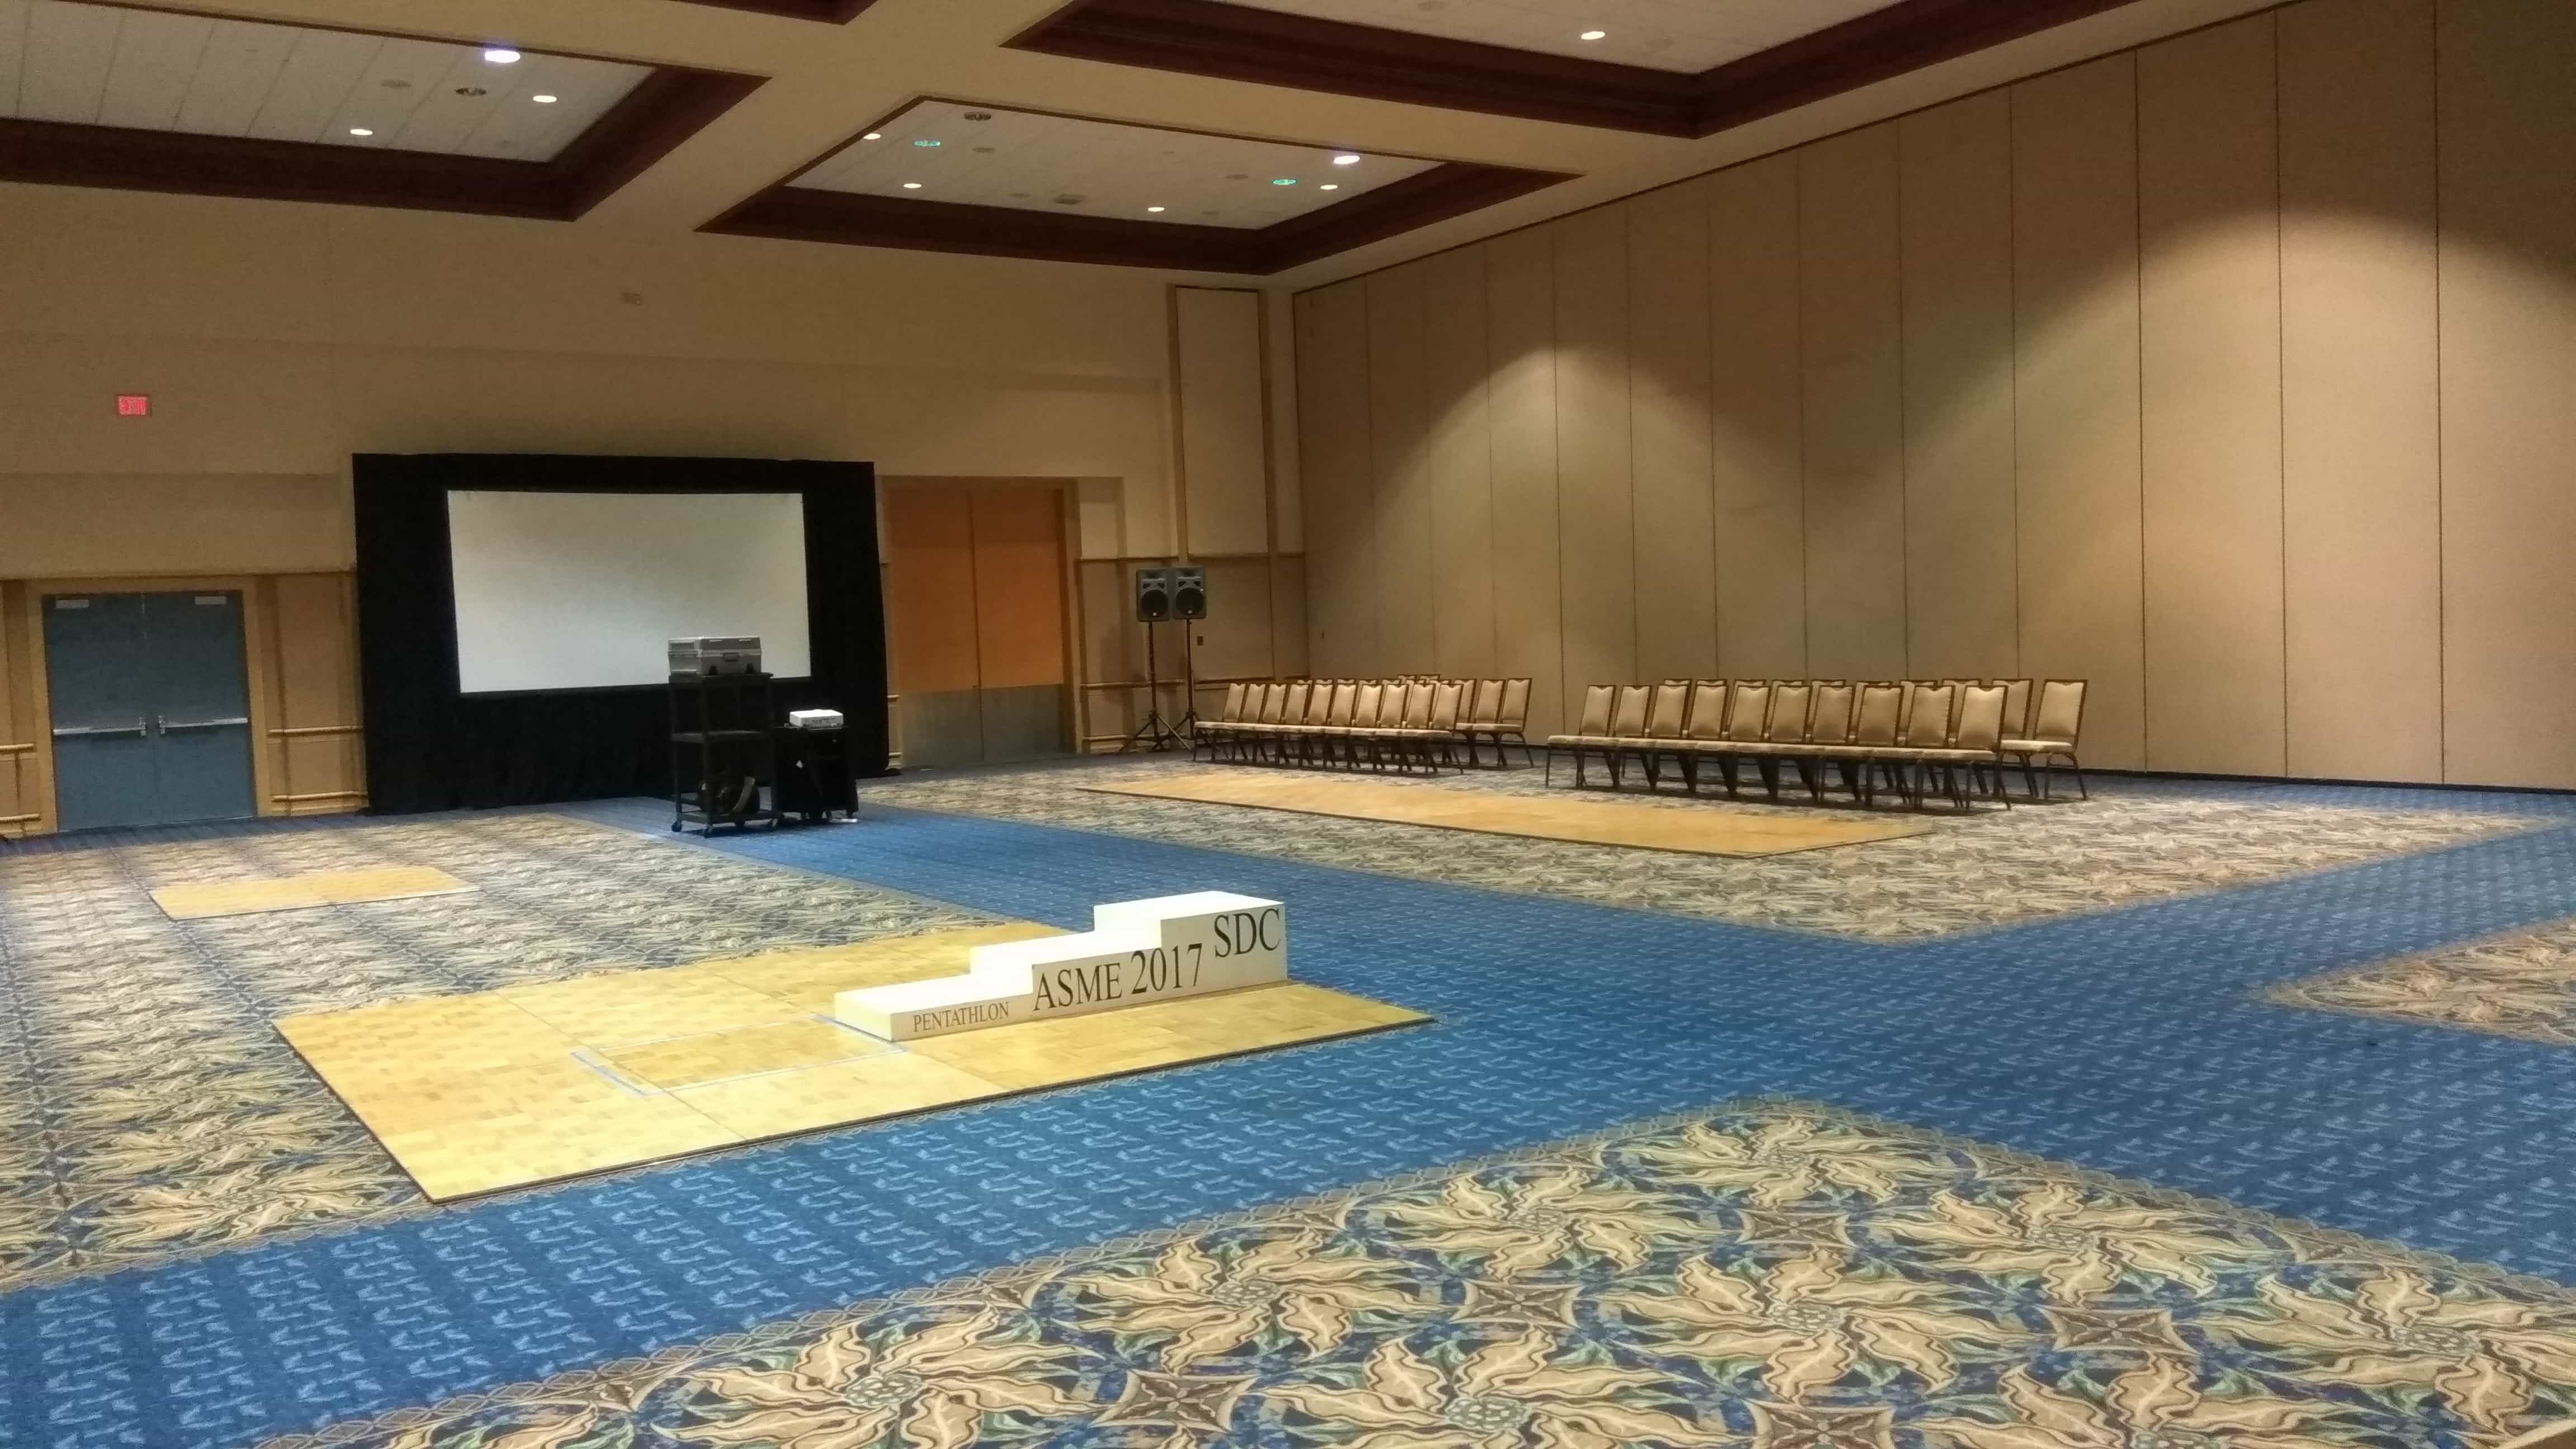 The place where history was created by UMIC in 2017. This is the stage for the ASME-SDC World Finals at Tampa Convention Center Florida.